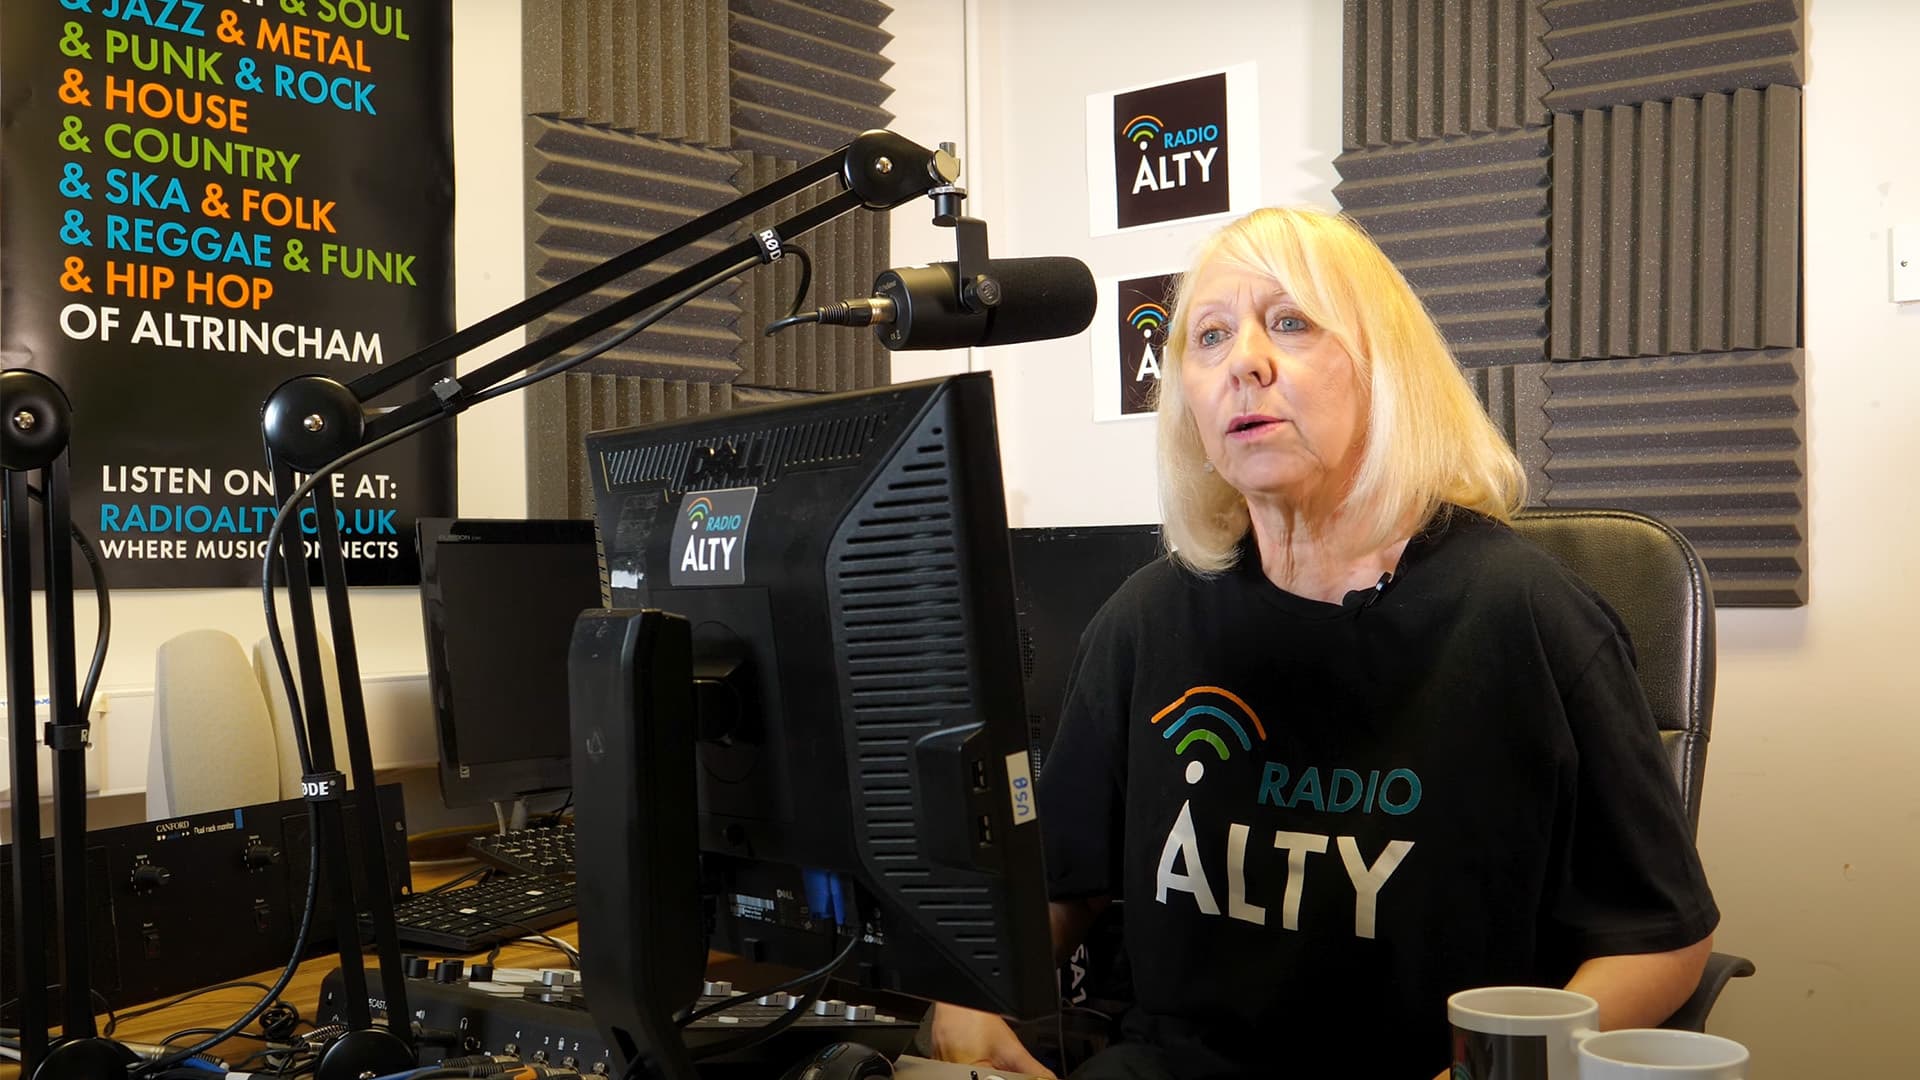 Annie, presenter of the Hot Buttered Soul show on Radio Alty, sits in front of a microphone as she speaks. She is a white, blonde older woman wearing a black and white Radio Alty t-shirt.